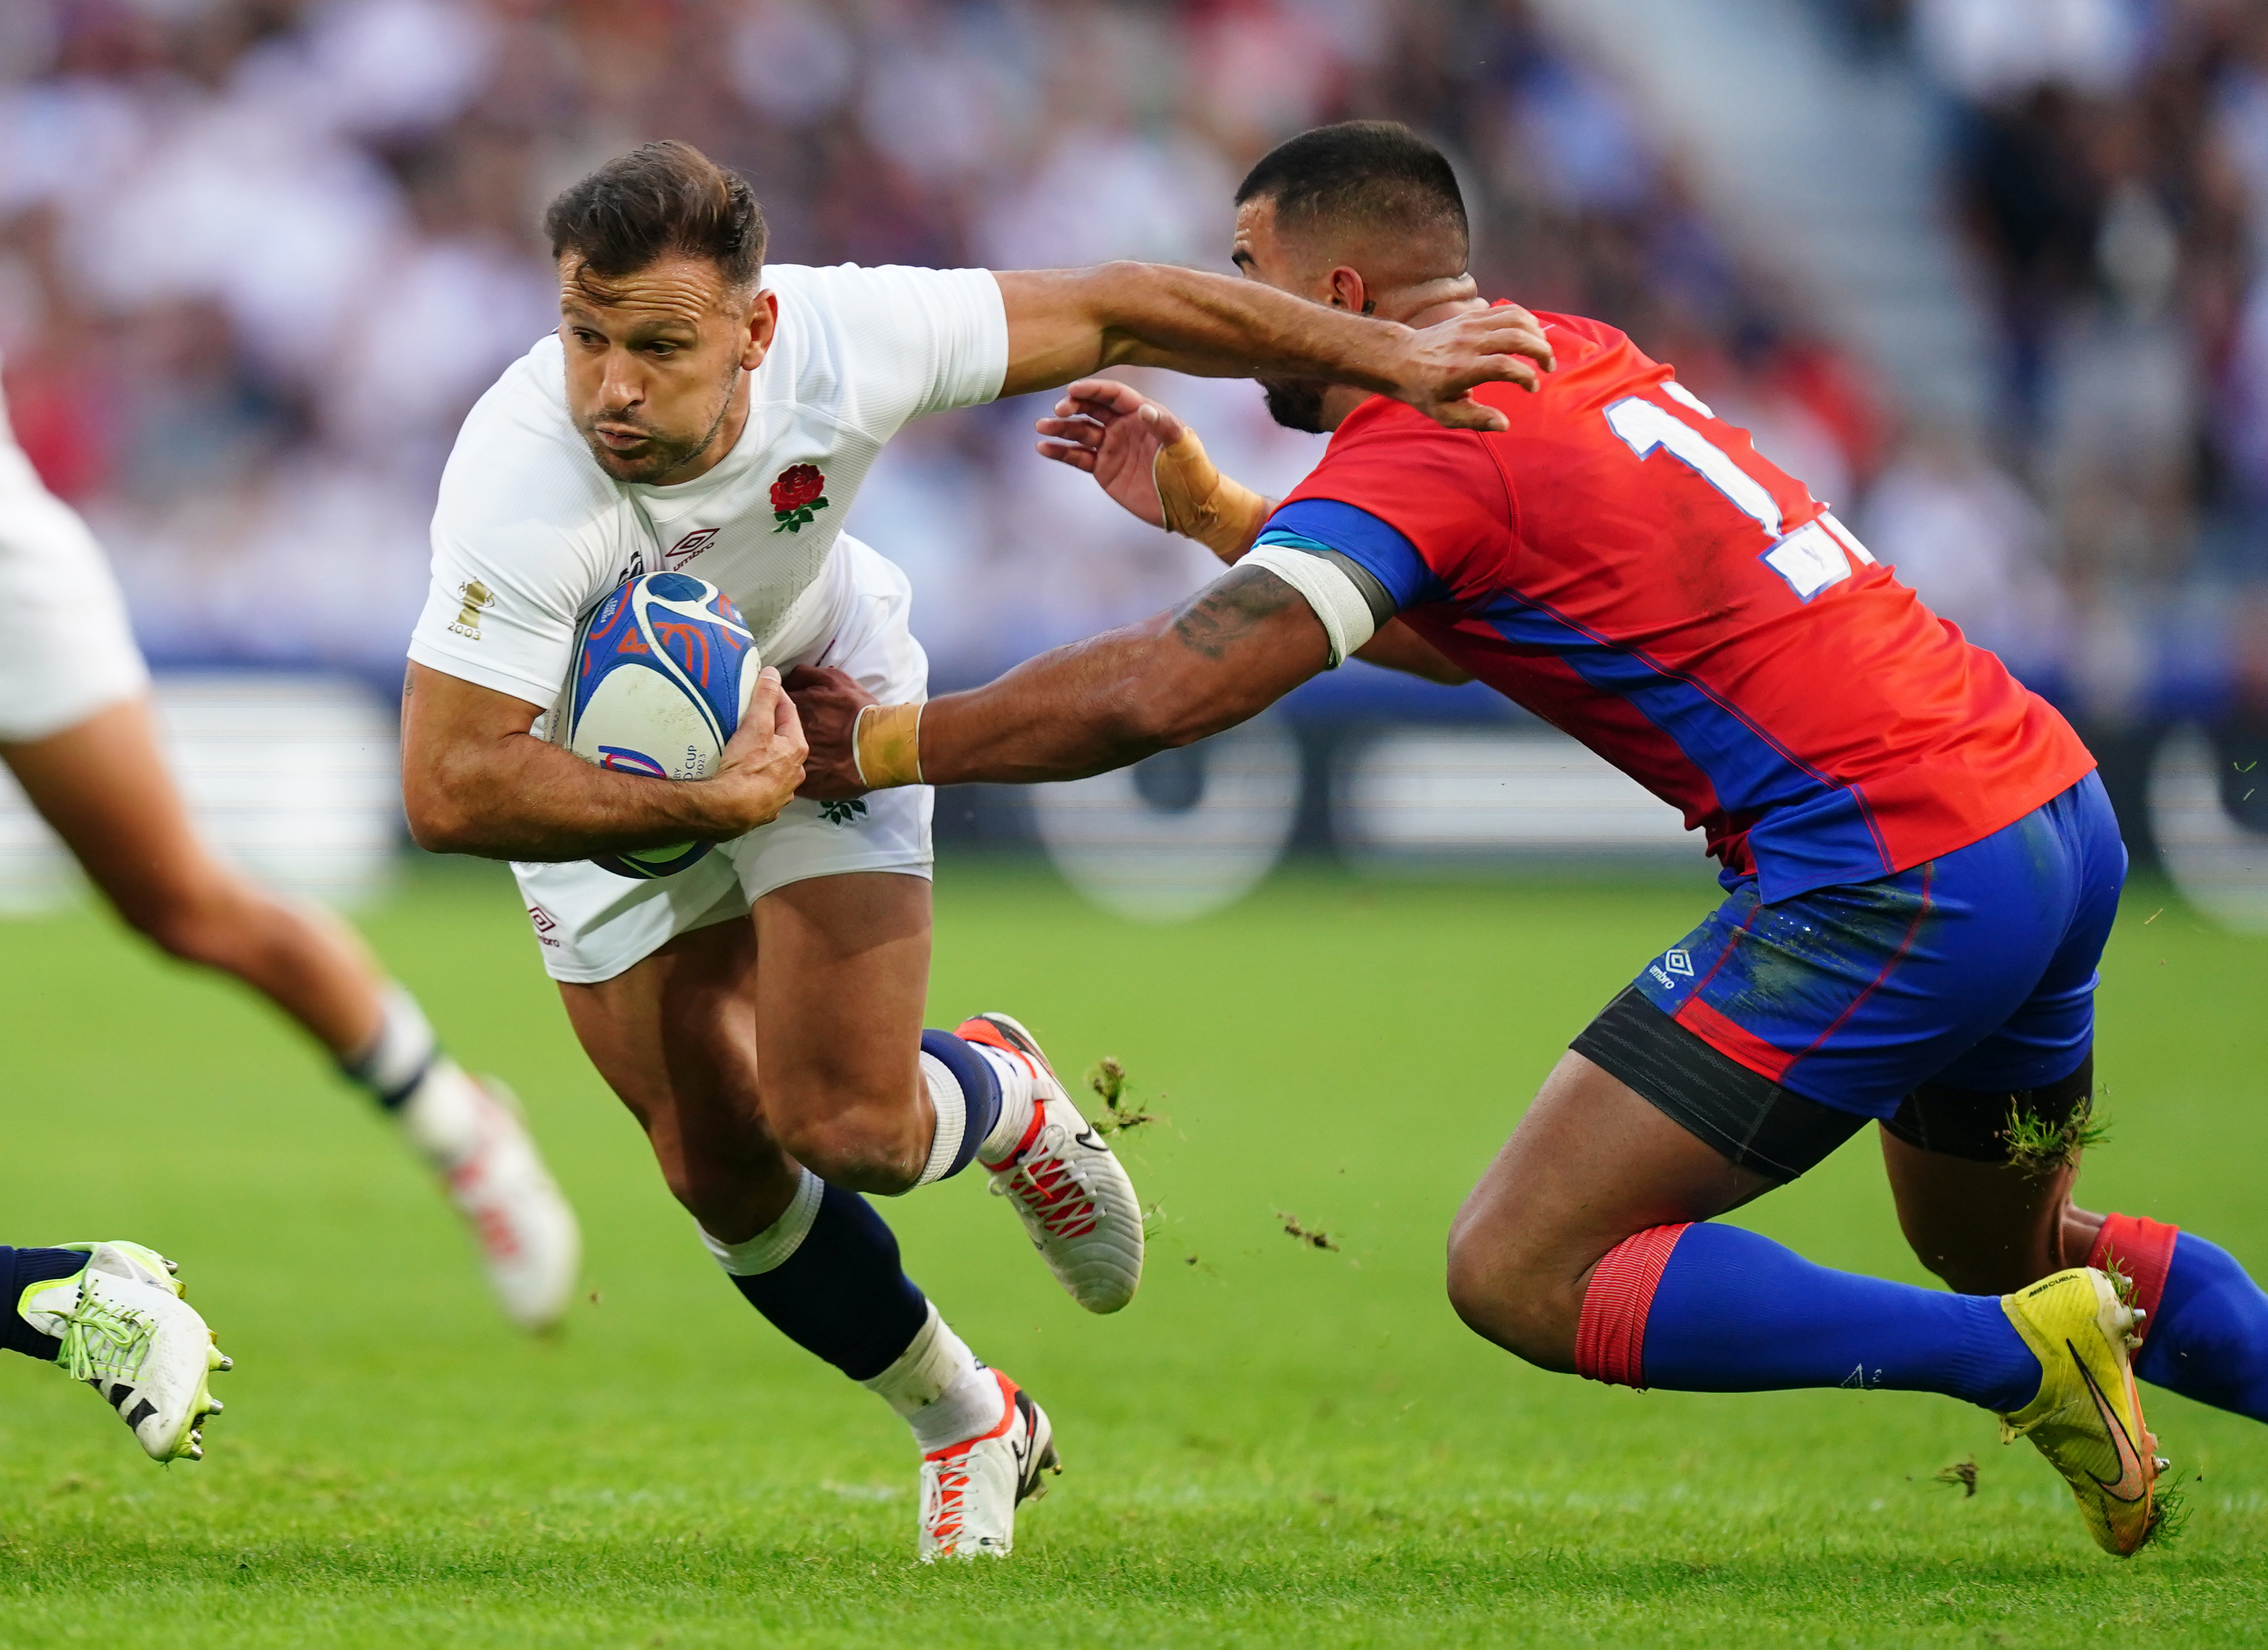 England’s Danny Care is tackled by Chile’s Matias Garafulic